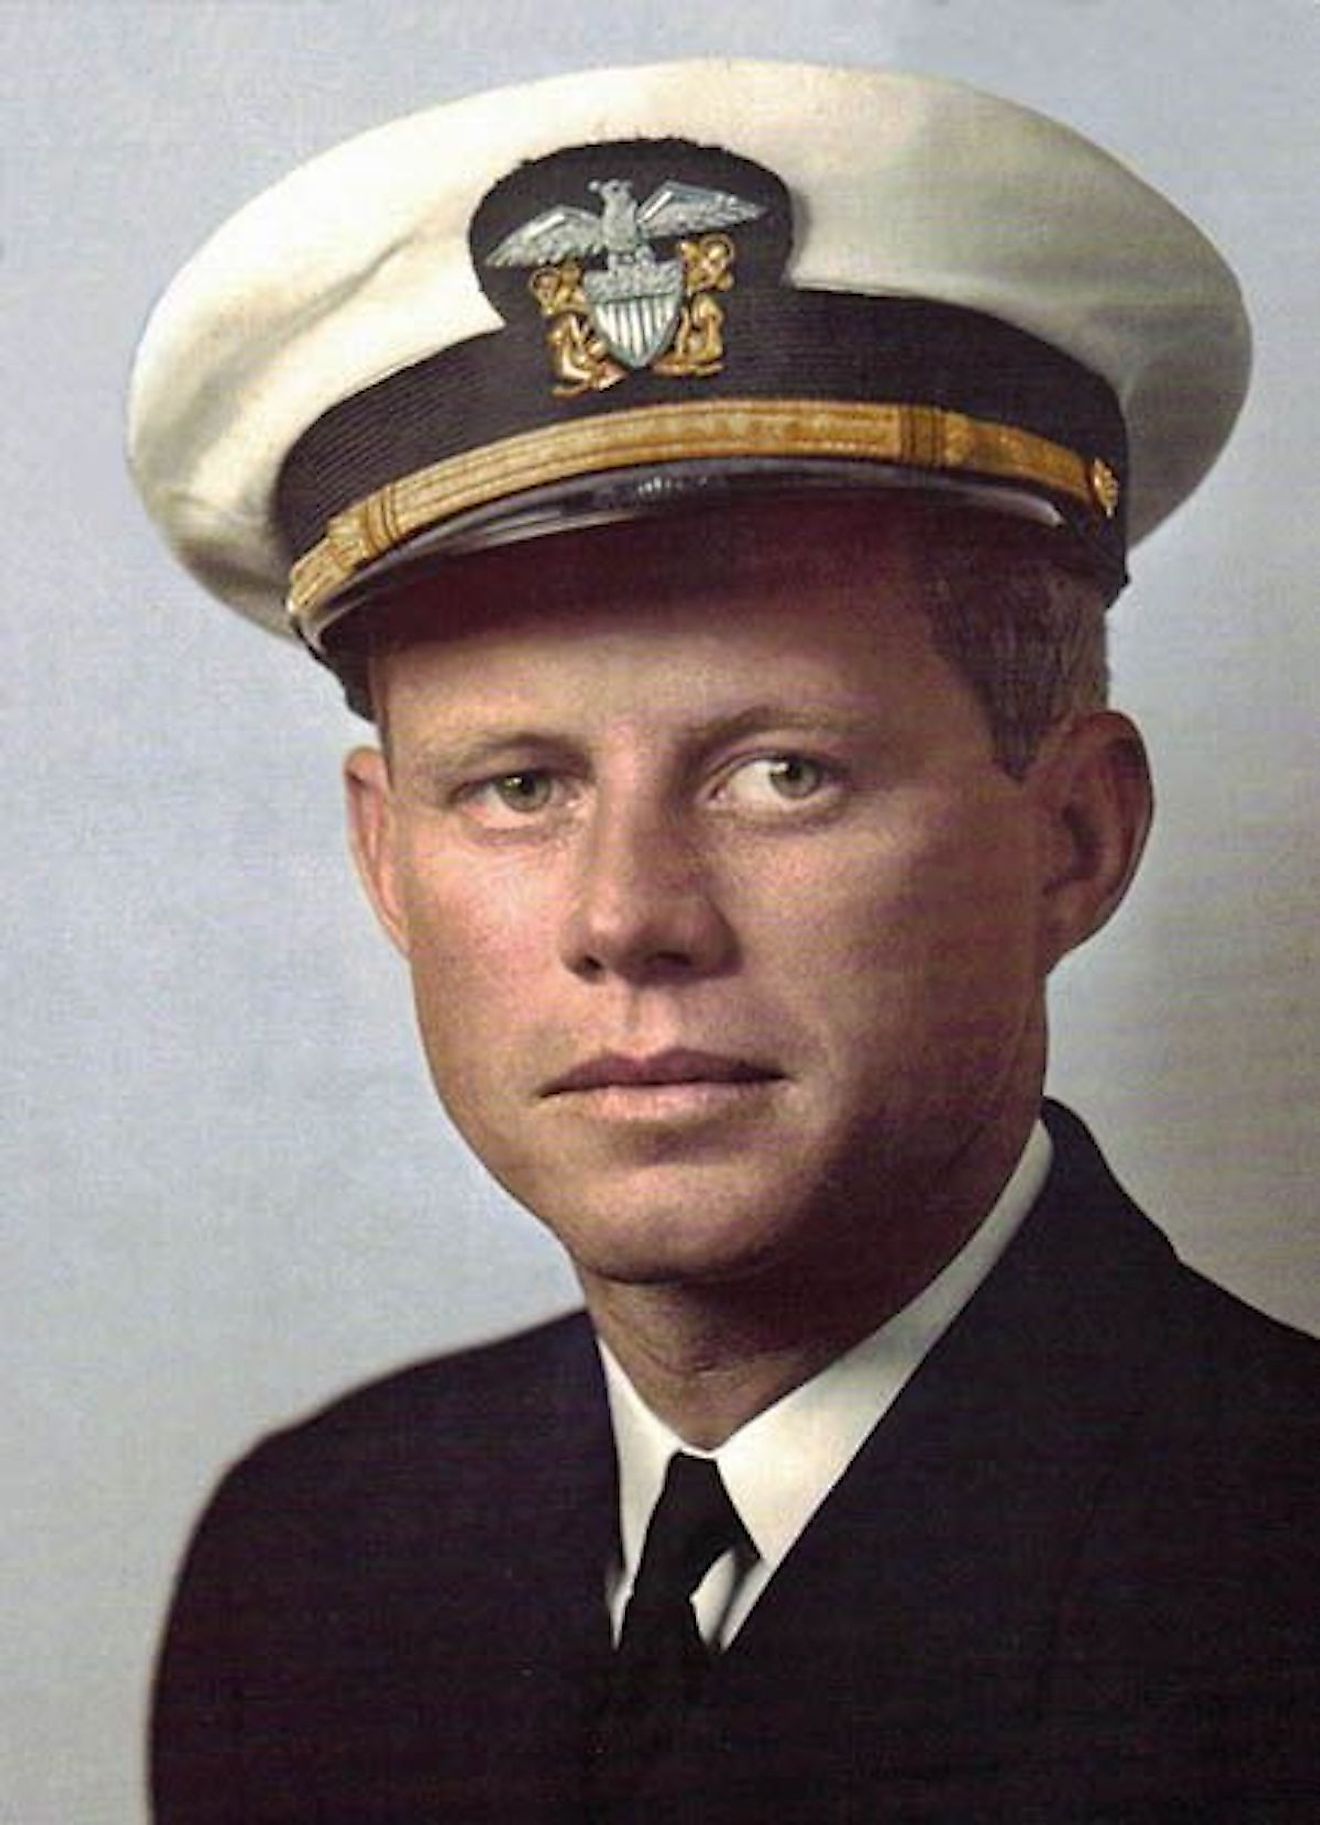 John F. Kennedy joined the Naval Reserve in 1941. Image credit: Pinterest.com